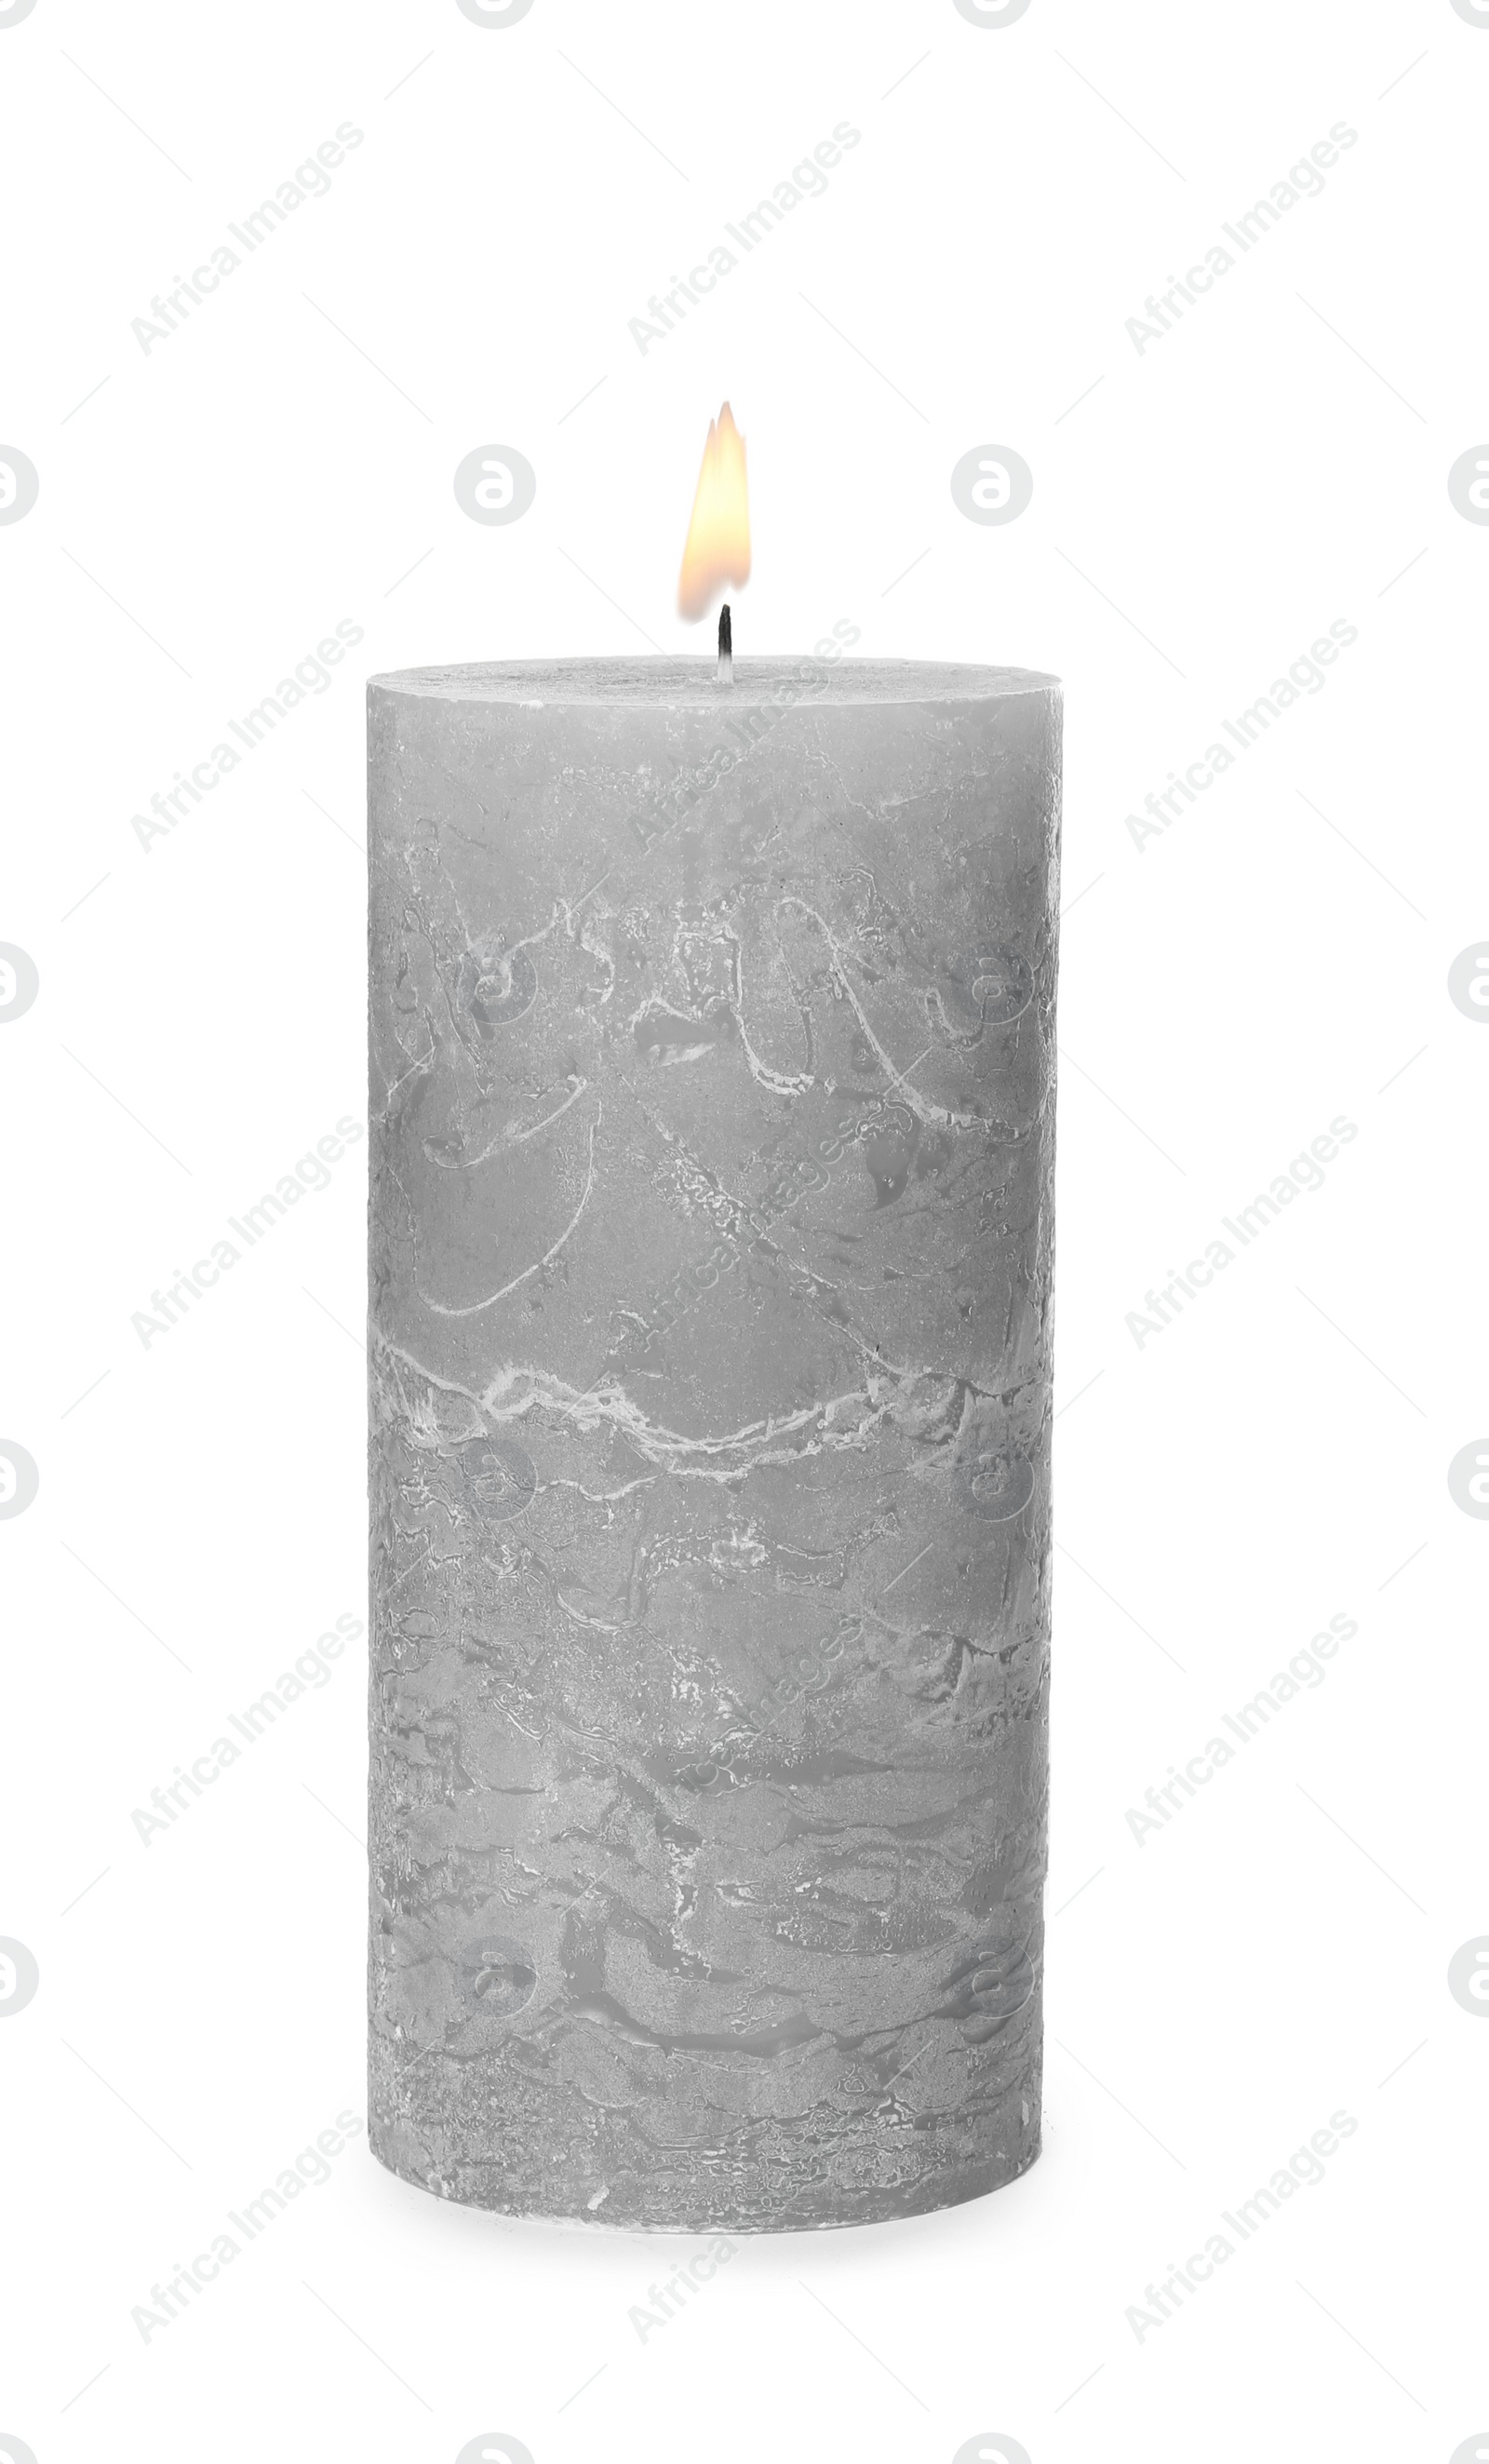 Photo of One alight wax candle on white background